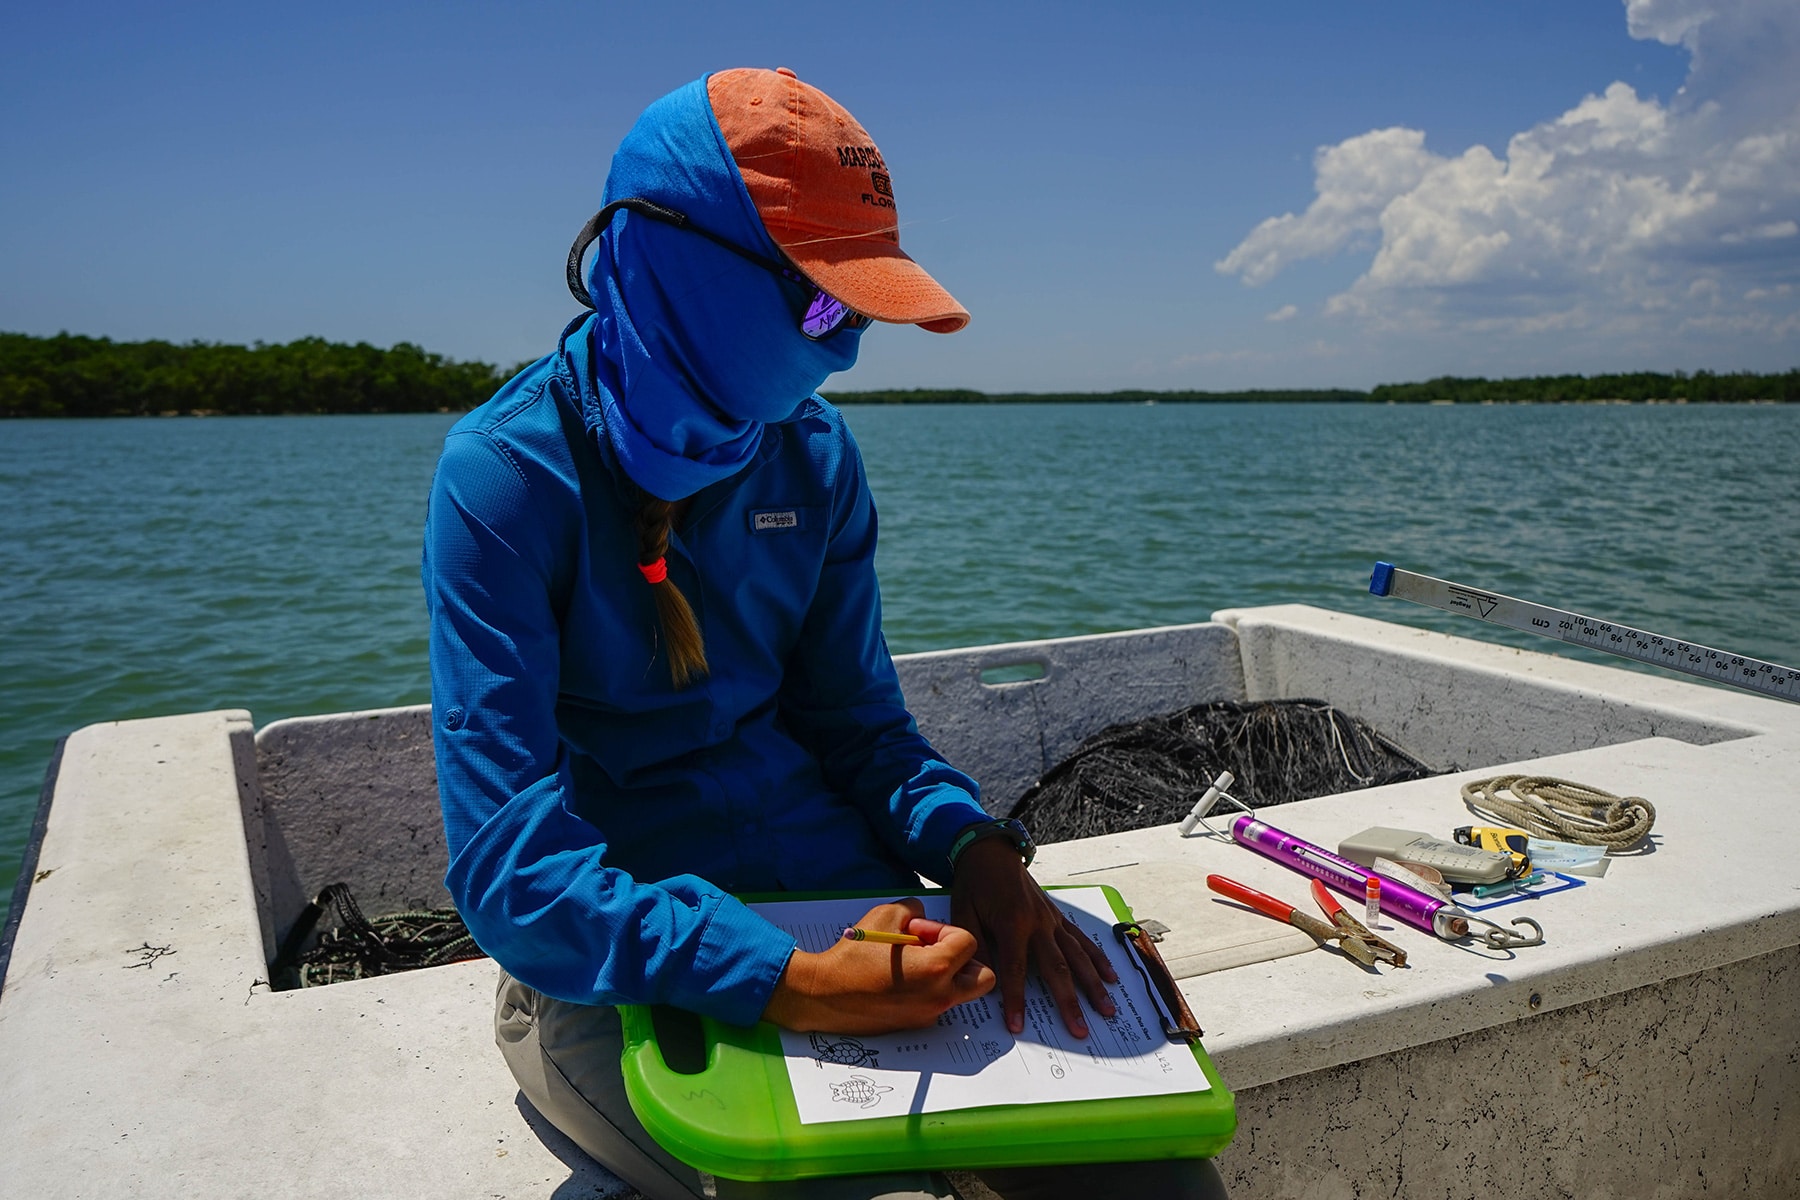 Conservancy of Southwest Florida Science intern sitting on a boat in the Ten Thousand Islands documenting Kemp's ridley turtle information